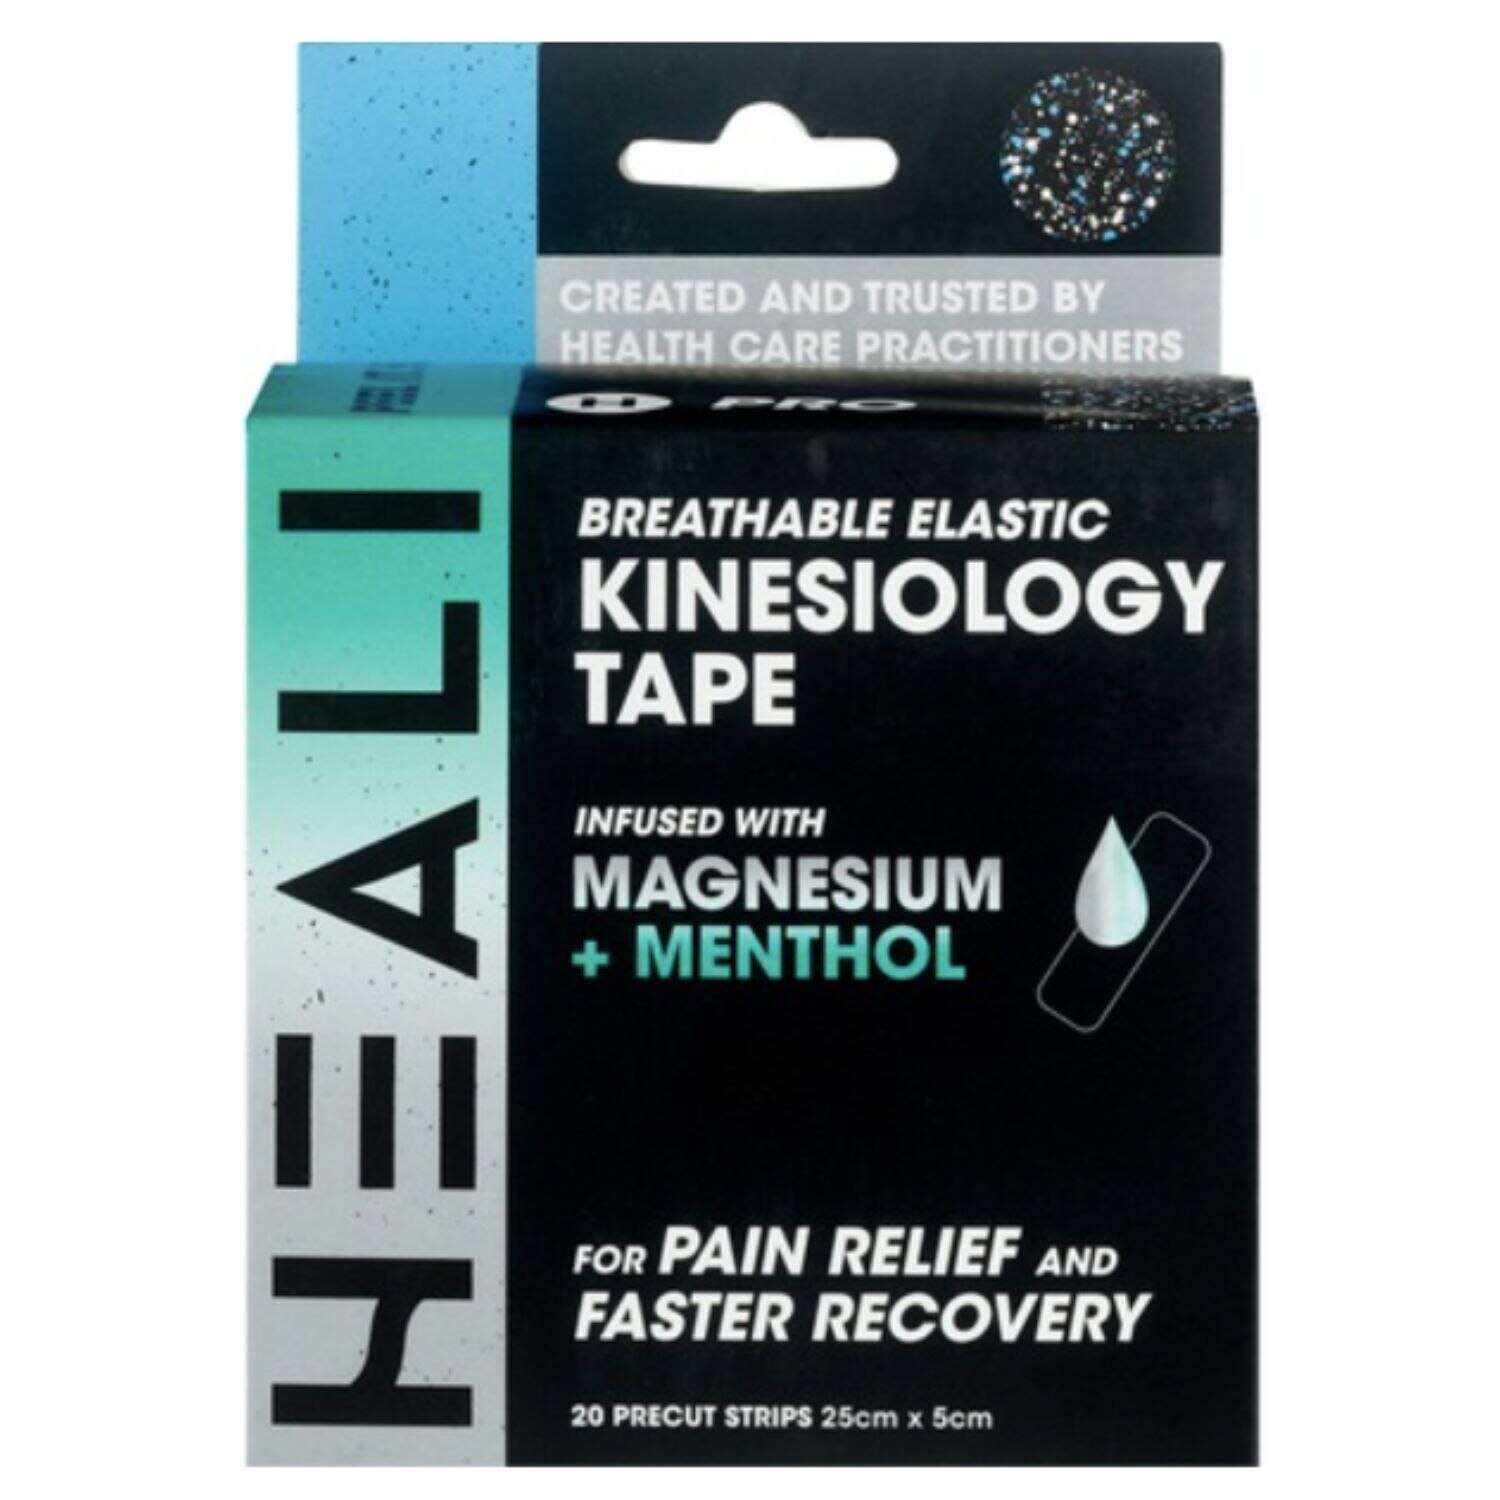 Heali Pro Kinesiology Tape Infused With Magnesium & Menthol, 20 Precut Strips, Splatter , CVS